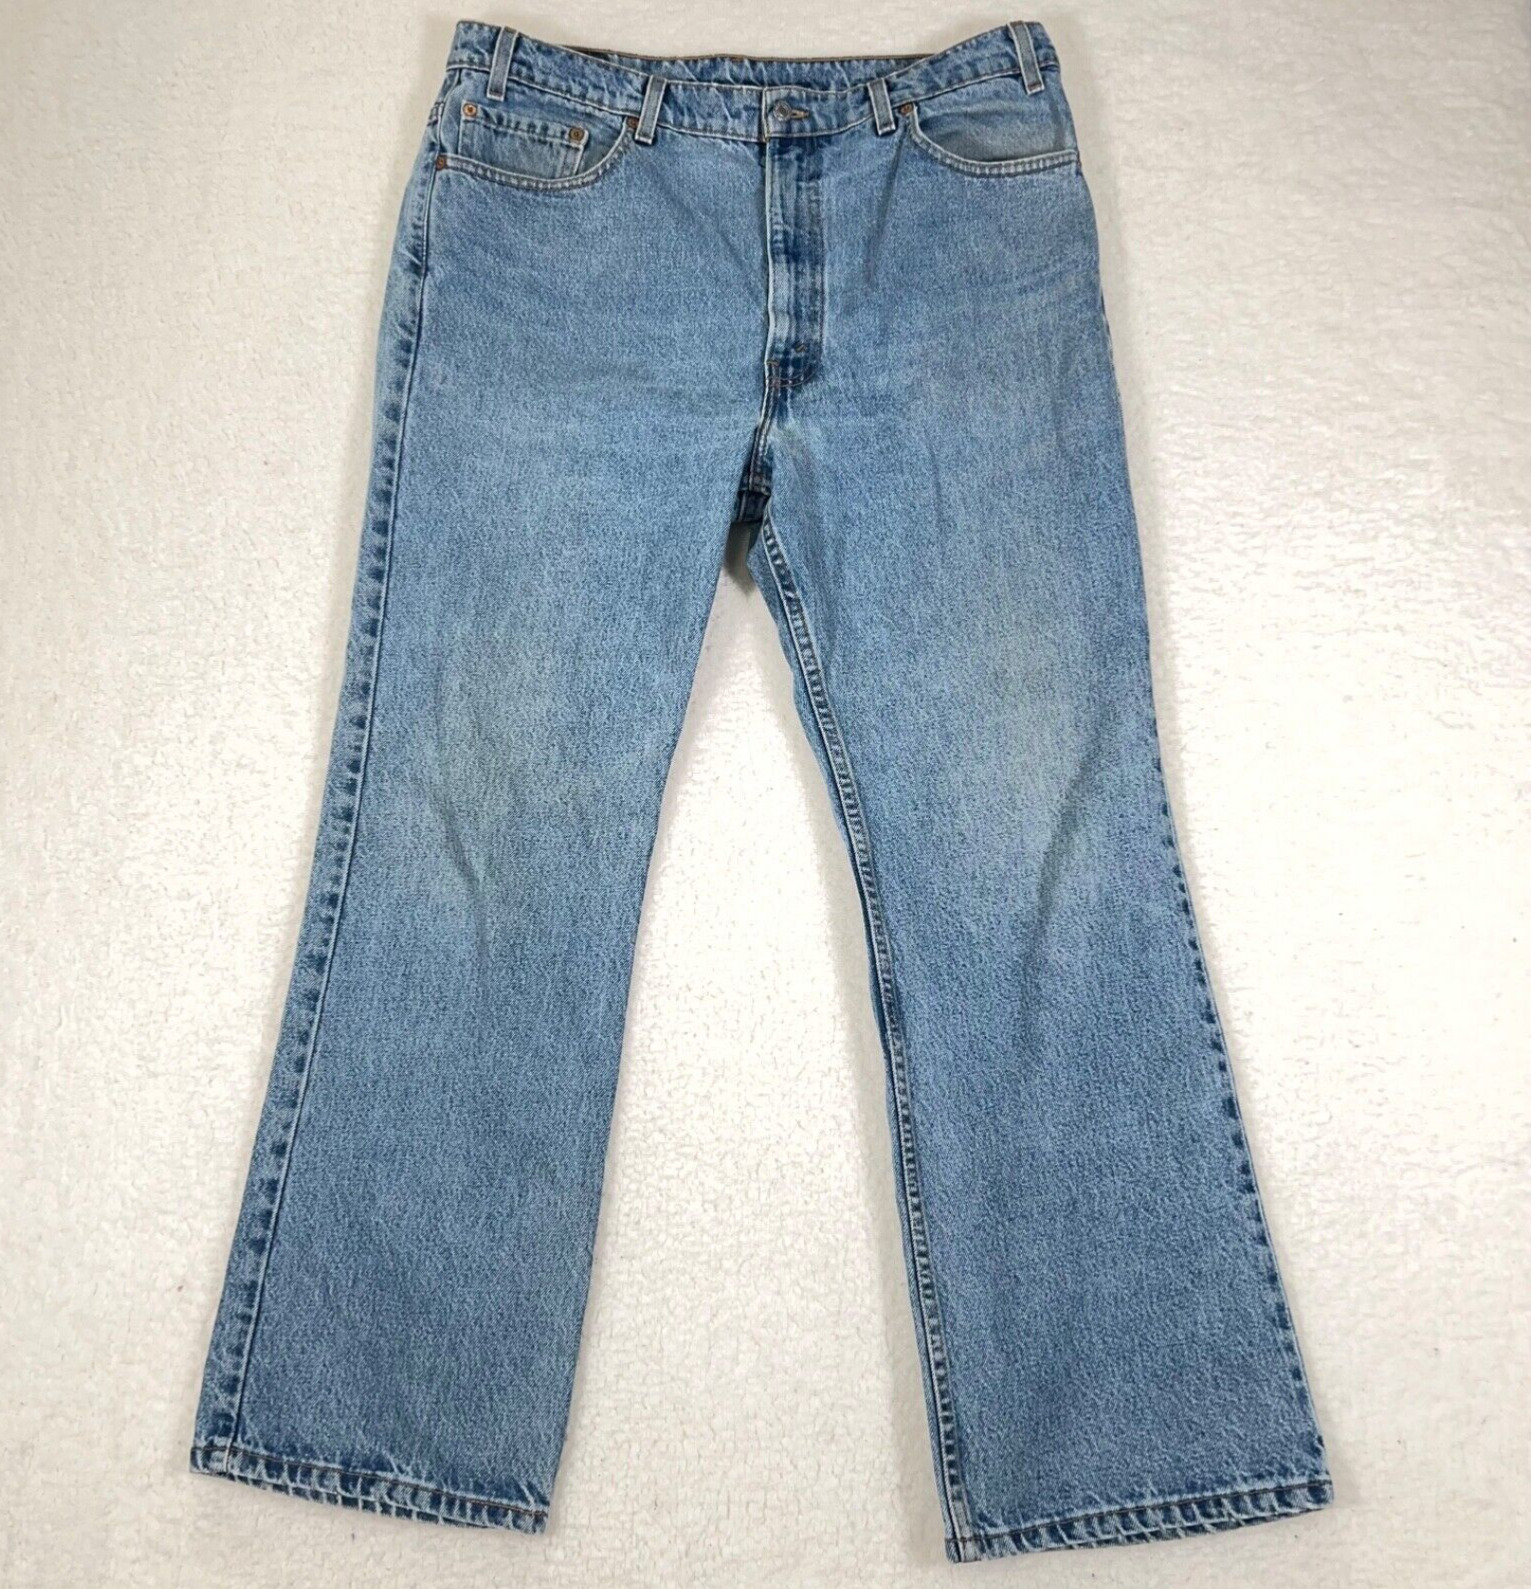 Vintage Levi’s 517 Jeans 38x30 Blue Denim Faded Bootcut 90s USA Made 40x30 Tag